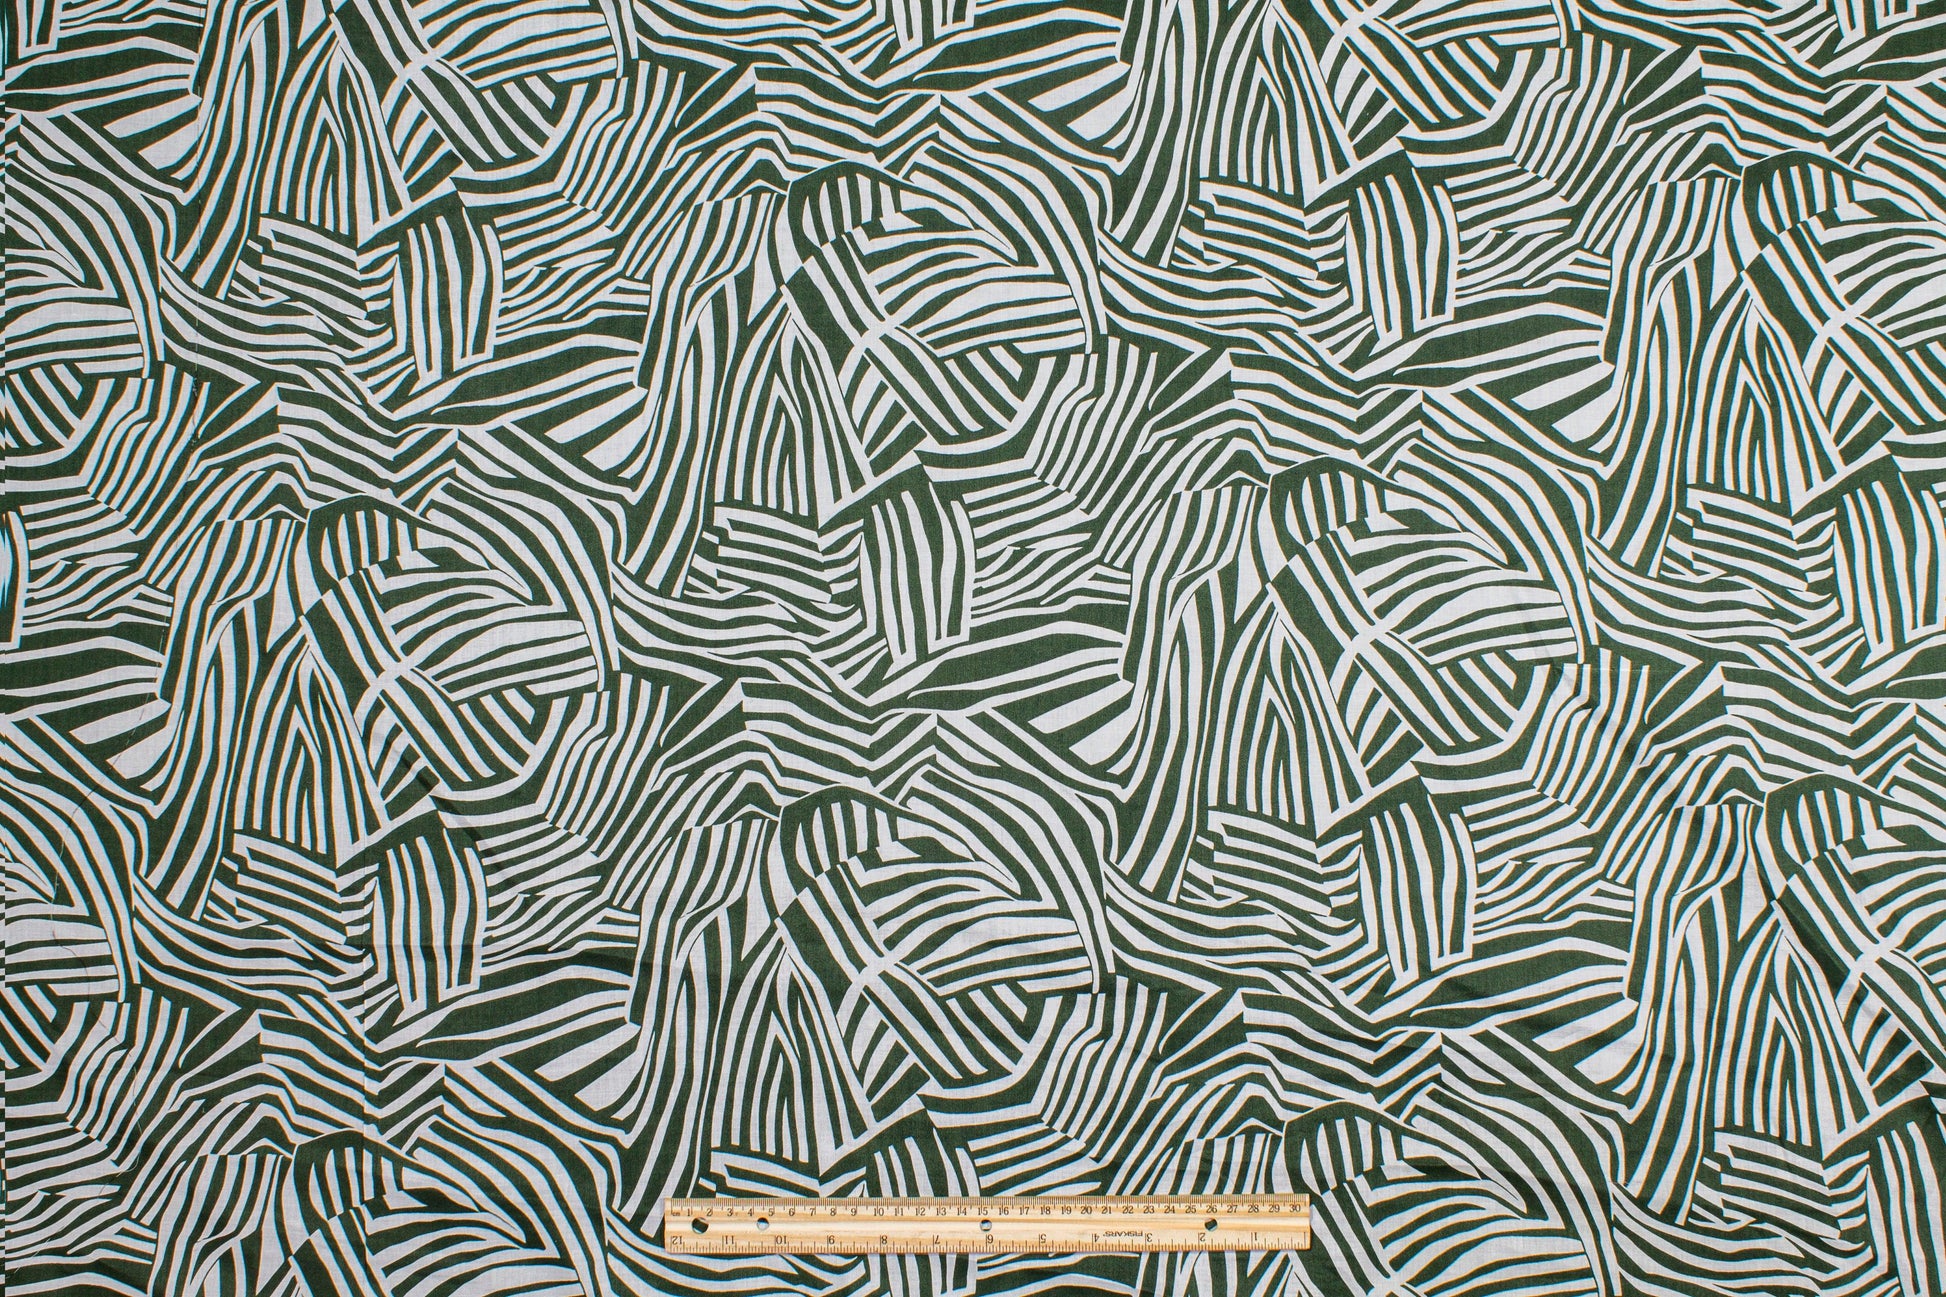 Abstract Zebra Print Cotton Voile - Green and White - Prime Fabrics